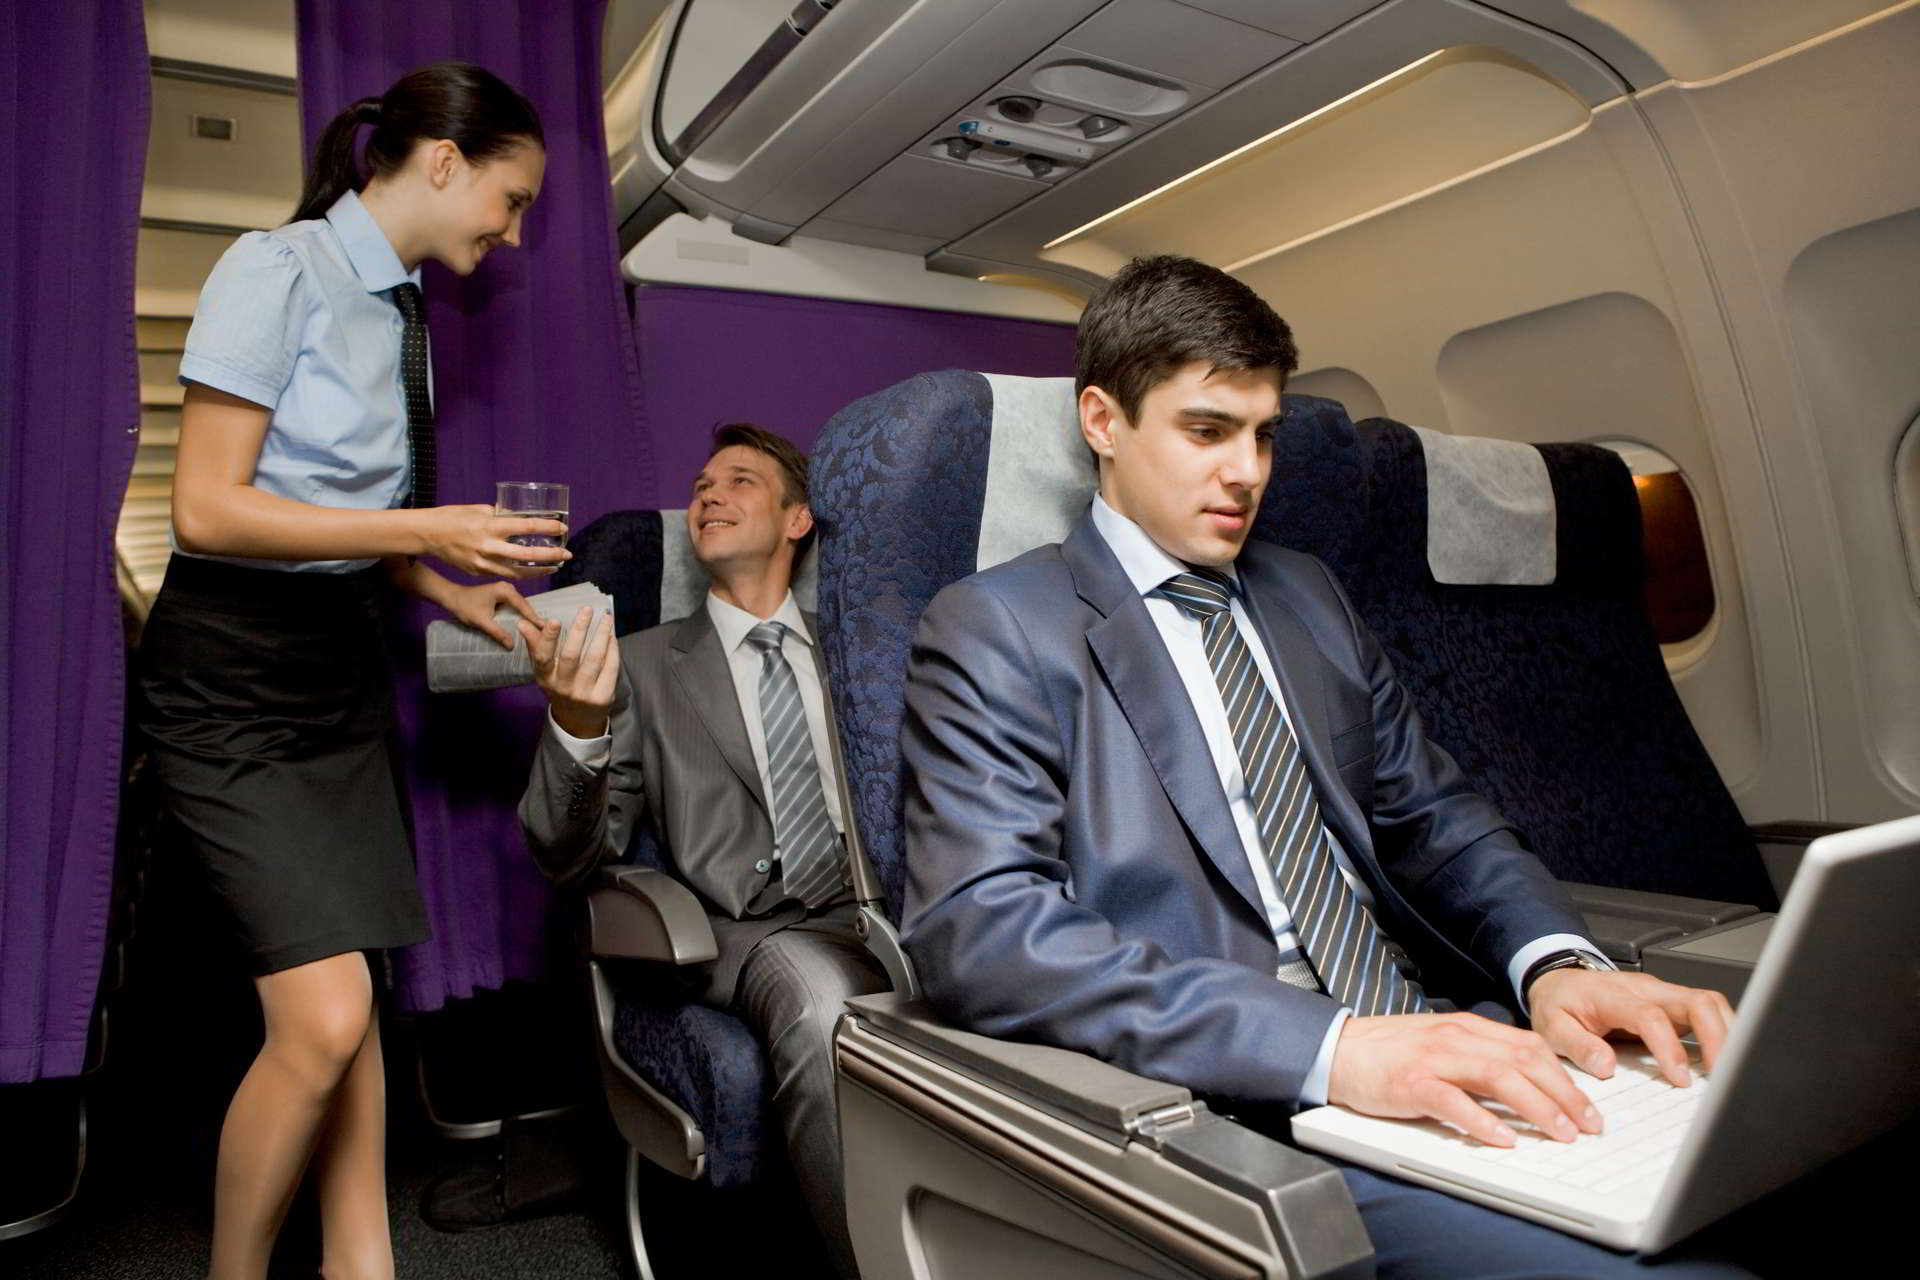 image busy male typing laptop with pretty stewardess giving glass water